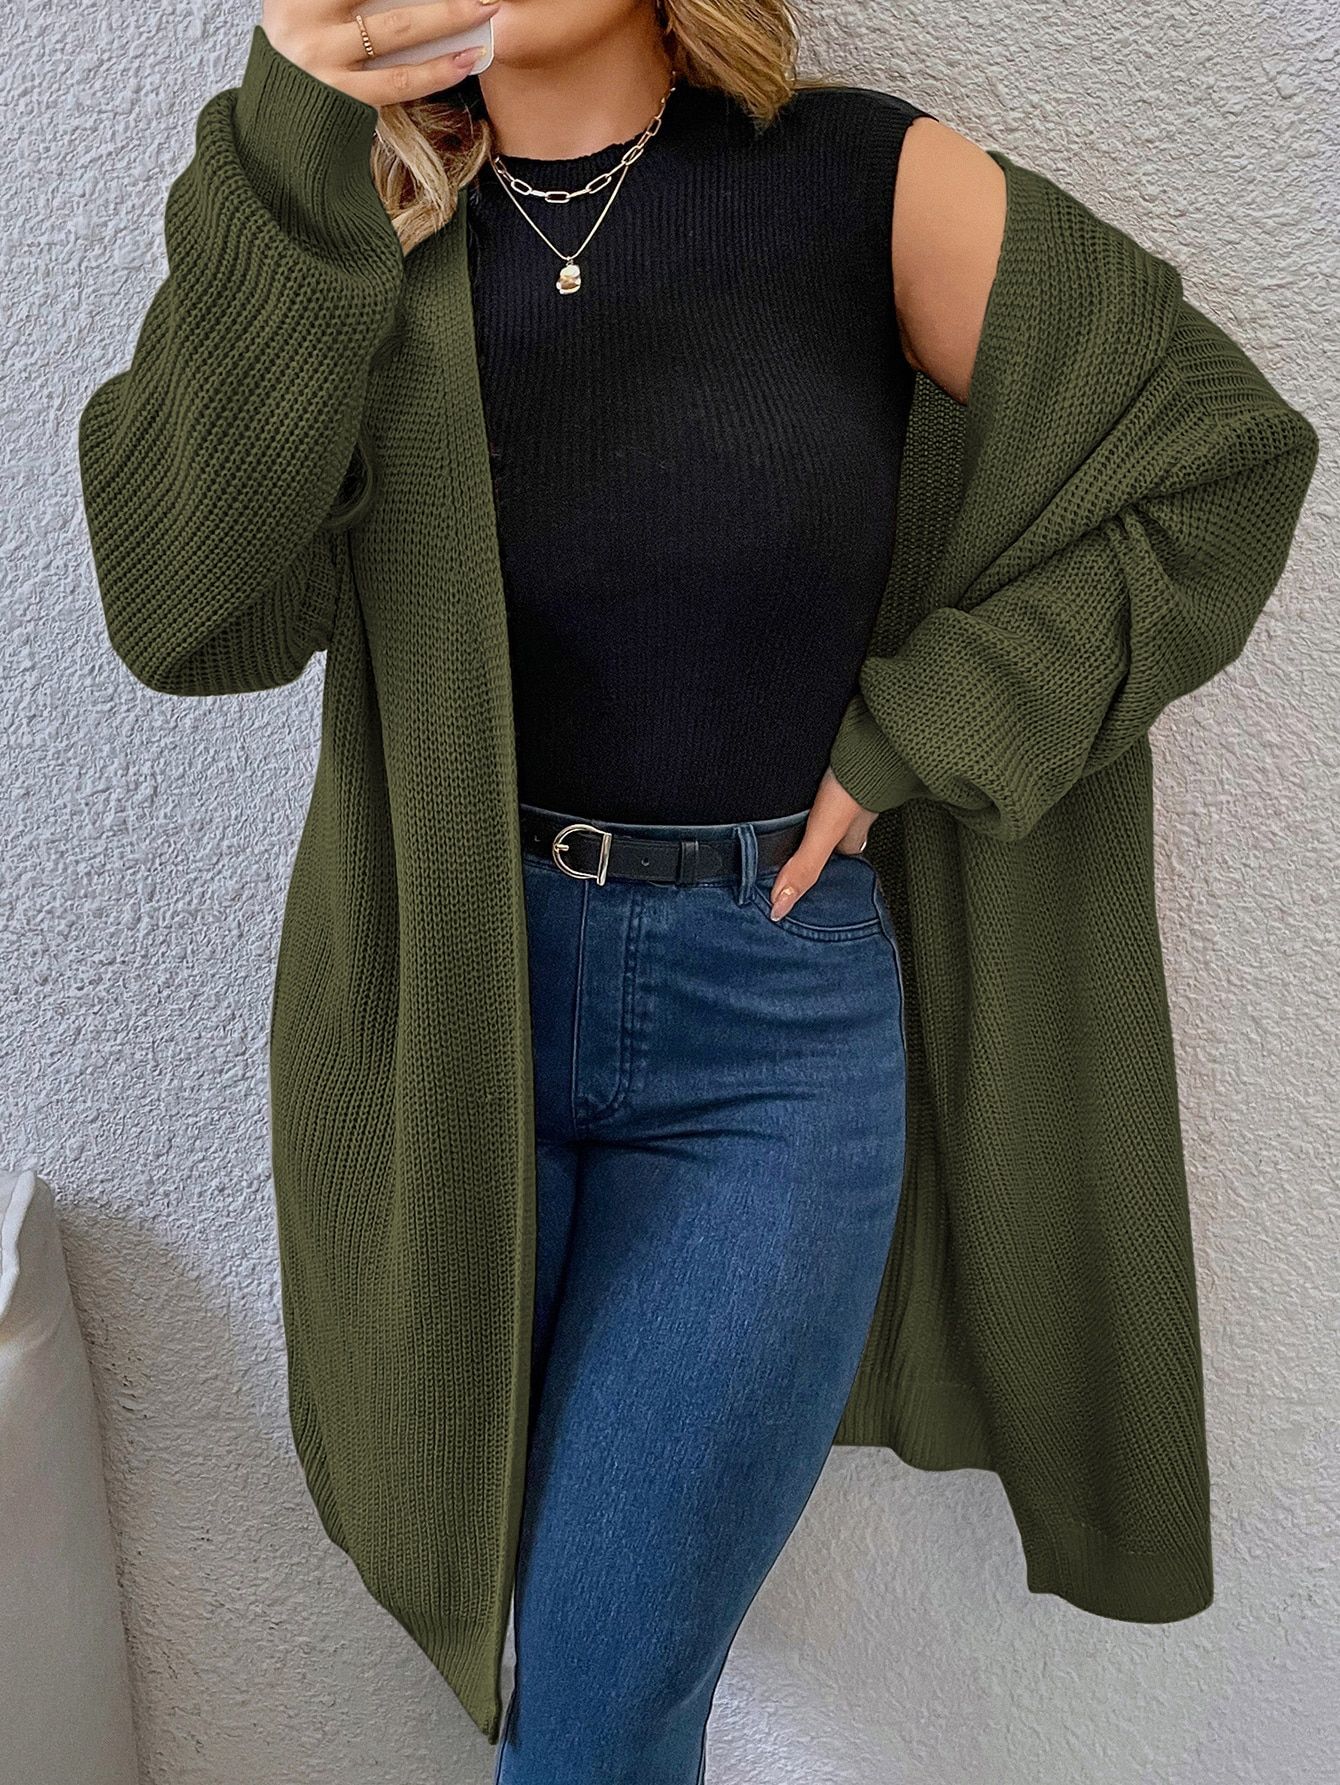 How to choose a perfect green cardigan?